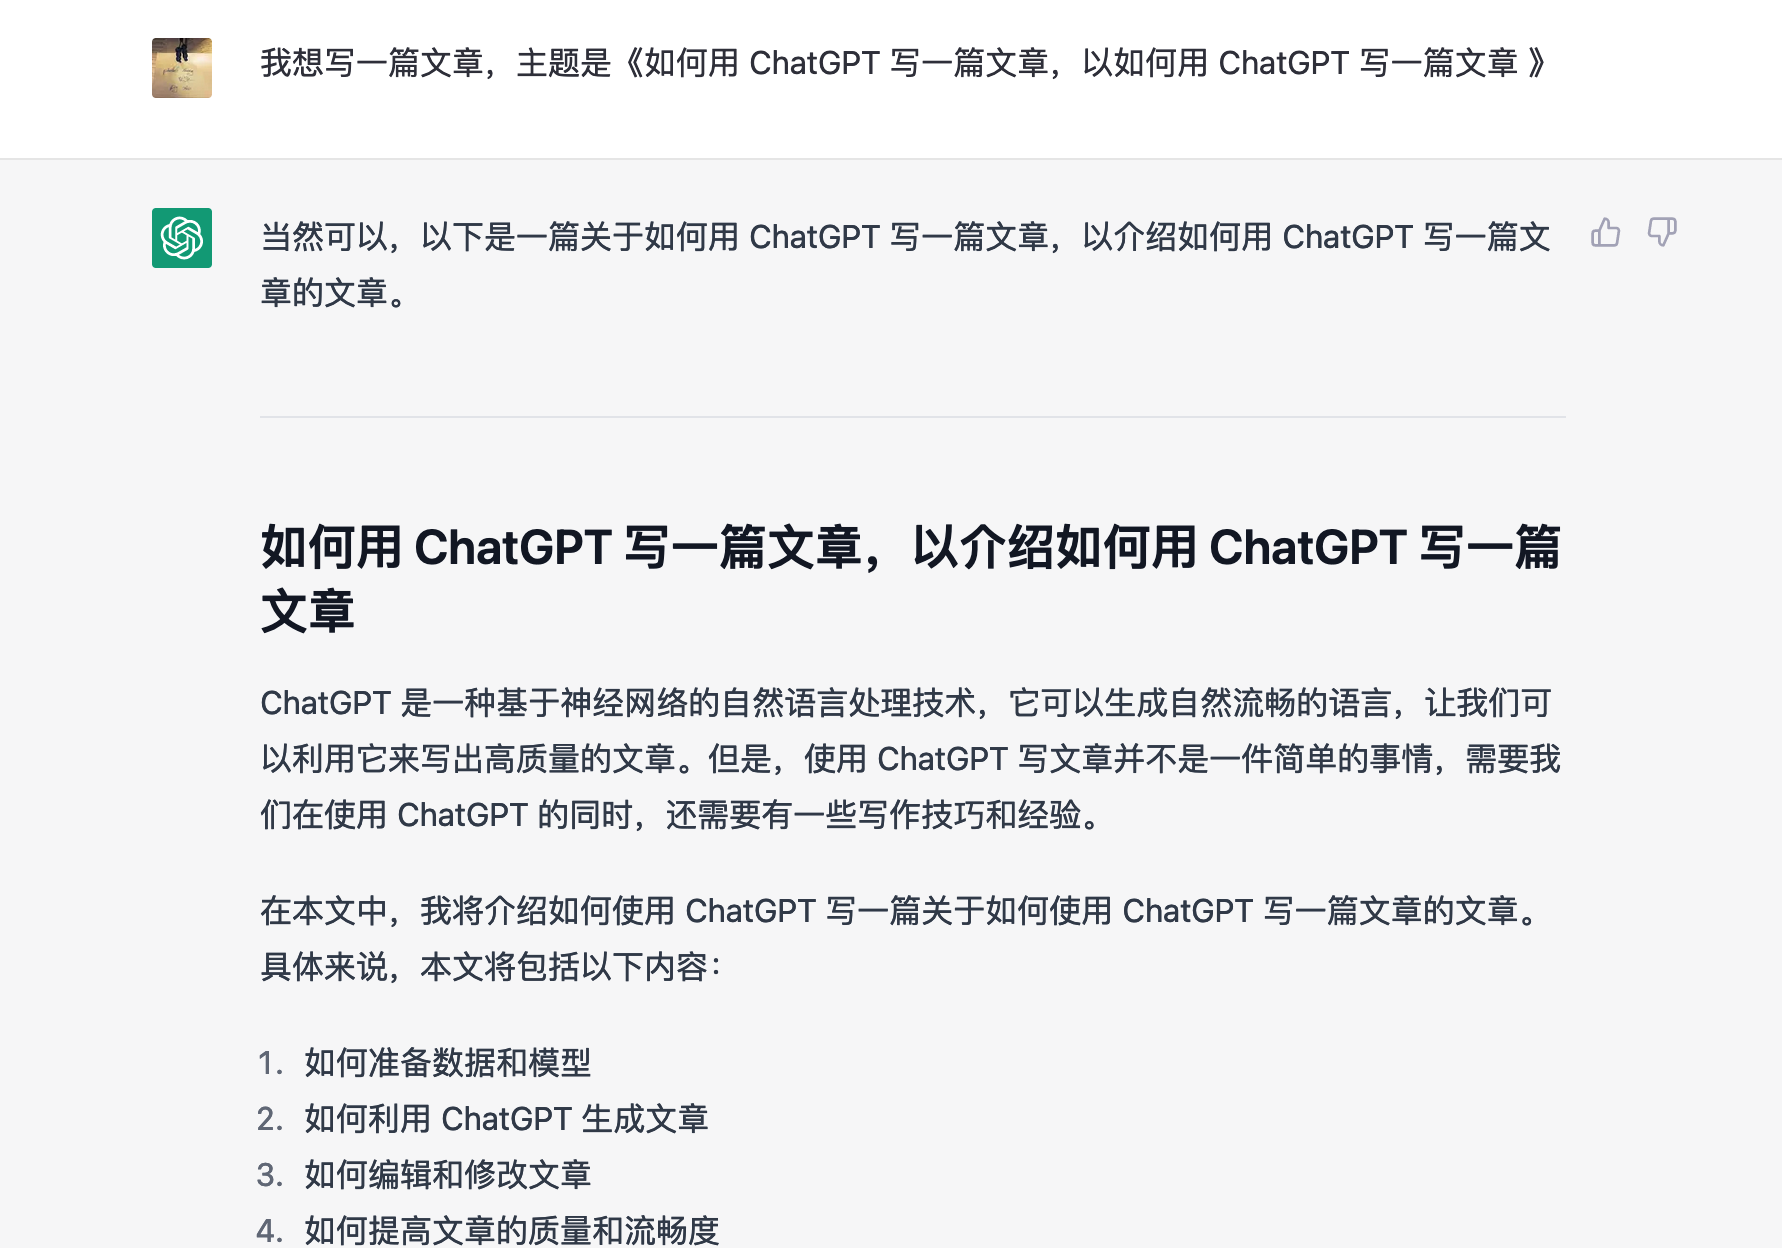 chatgpt-bootstrap-article.png